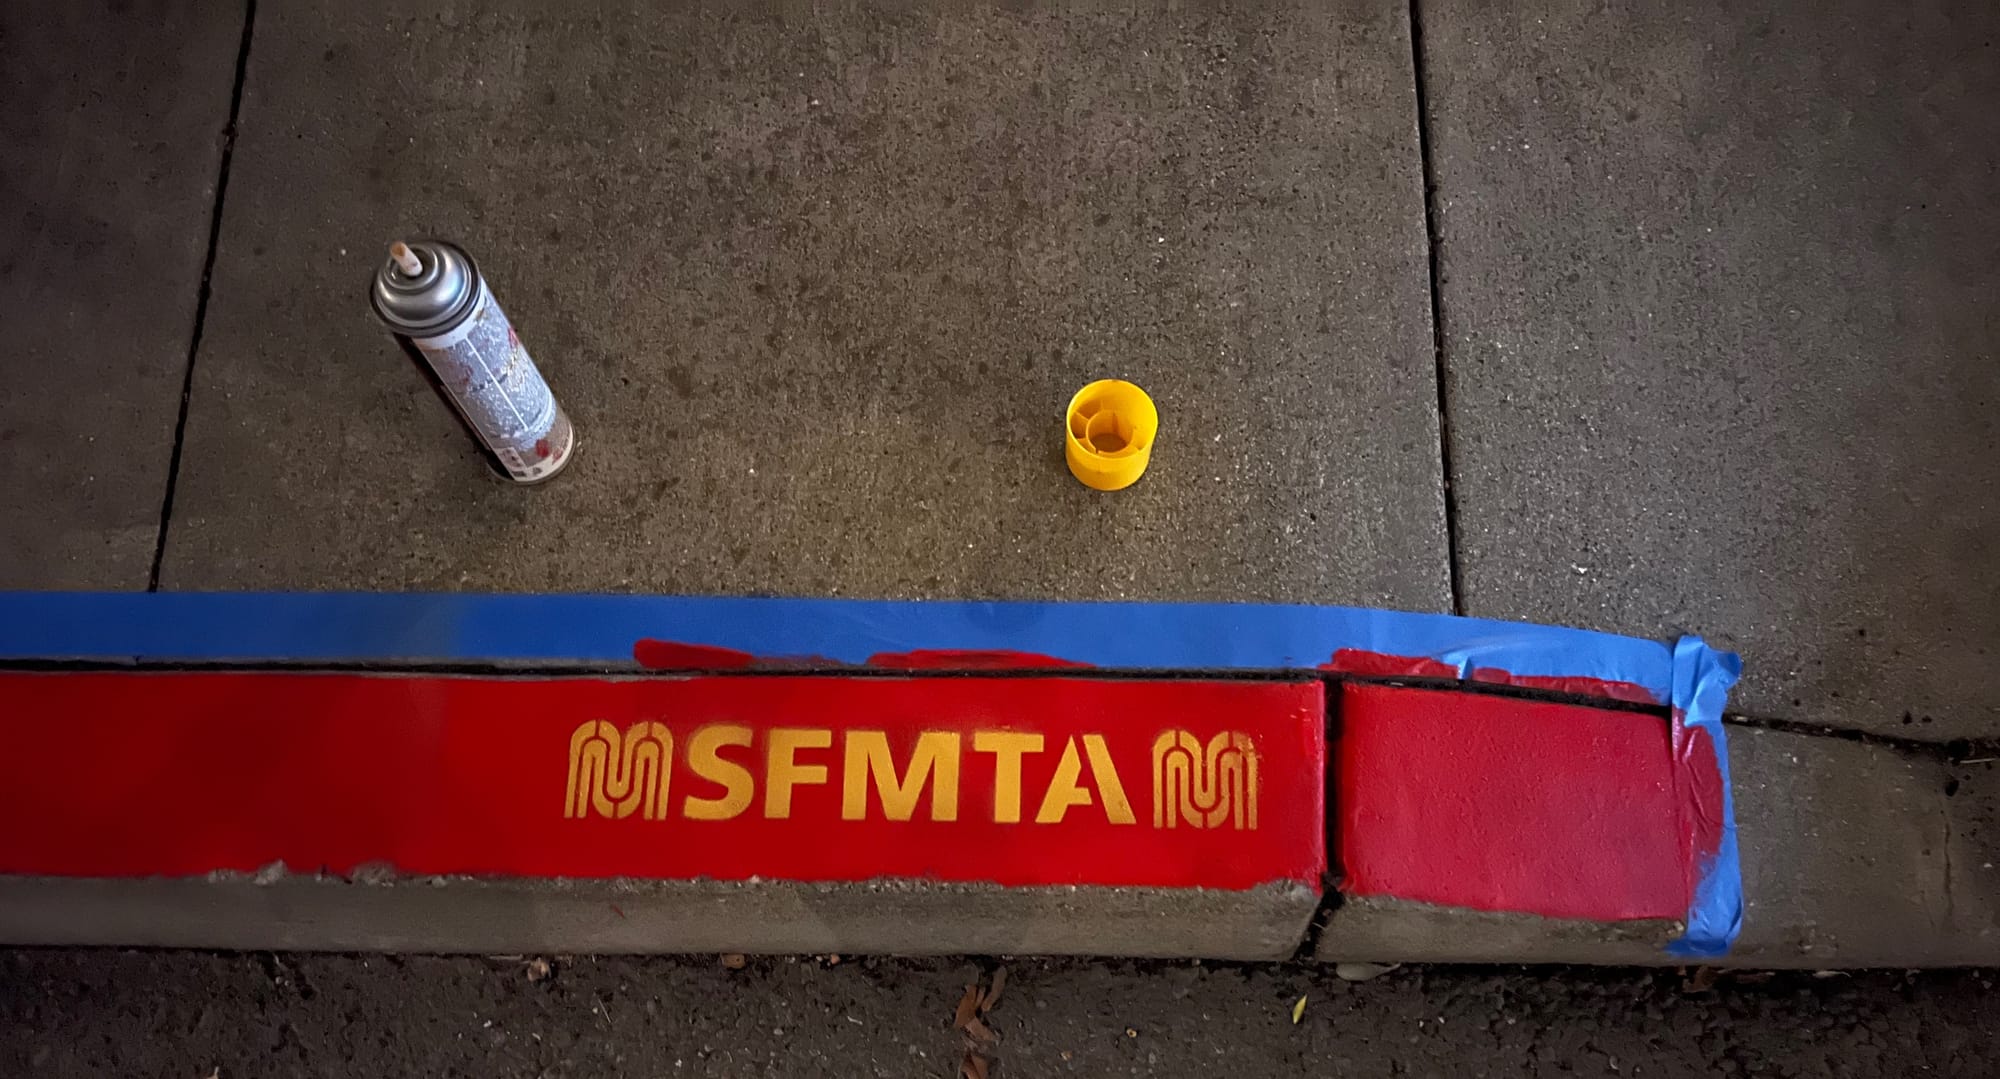 Freshly painted red curb lined with blue painters tape and a yellow SFMTA logo spray-painted on it